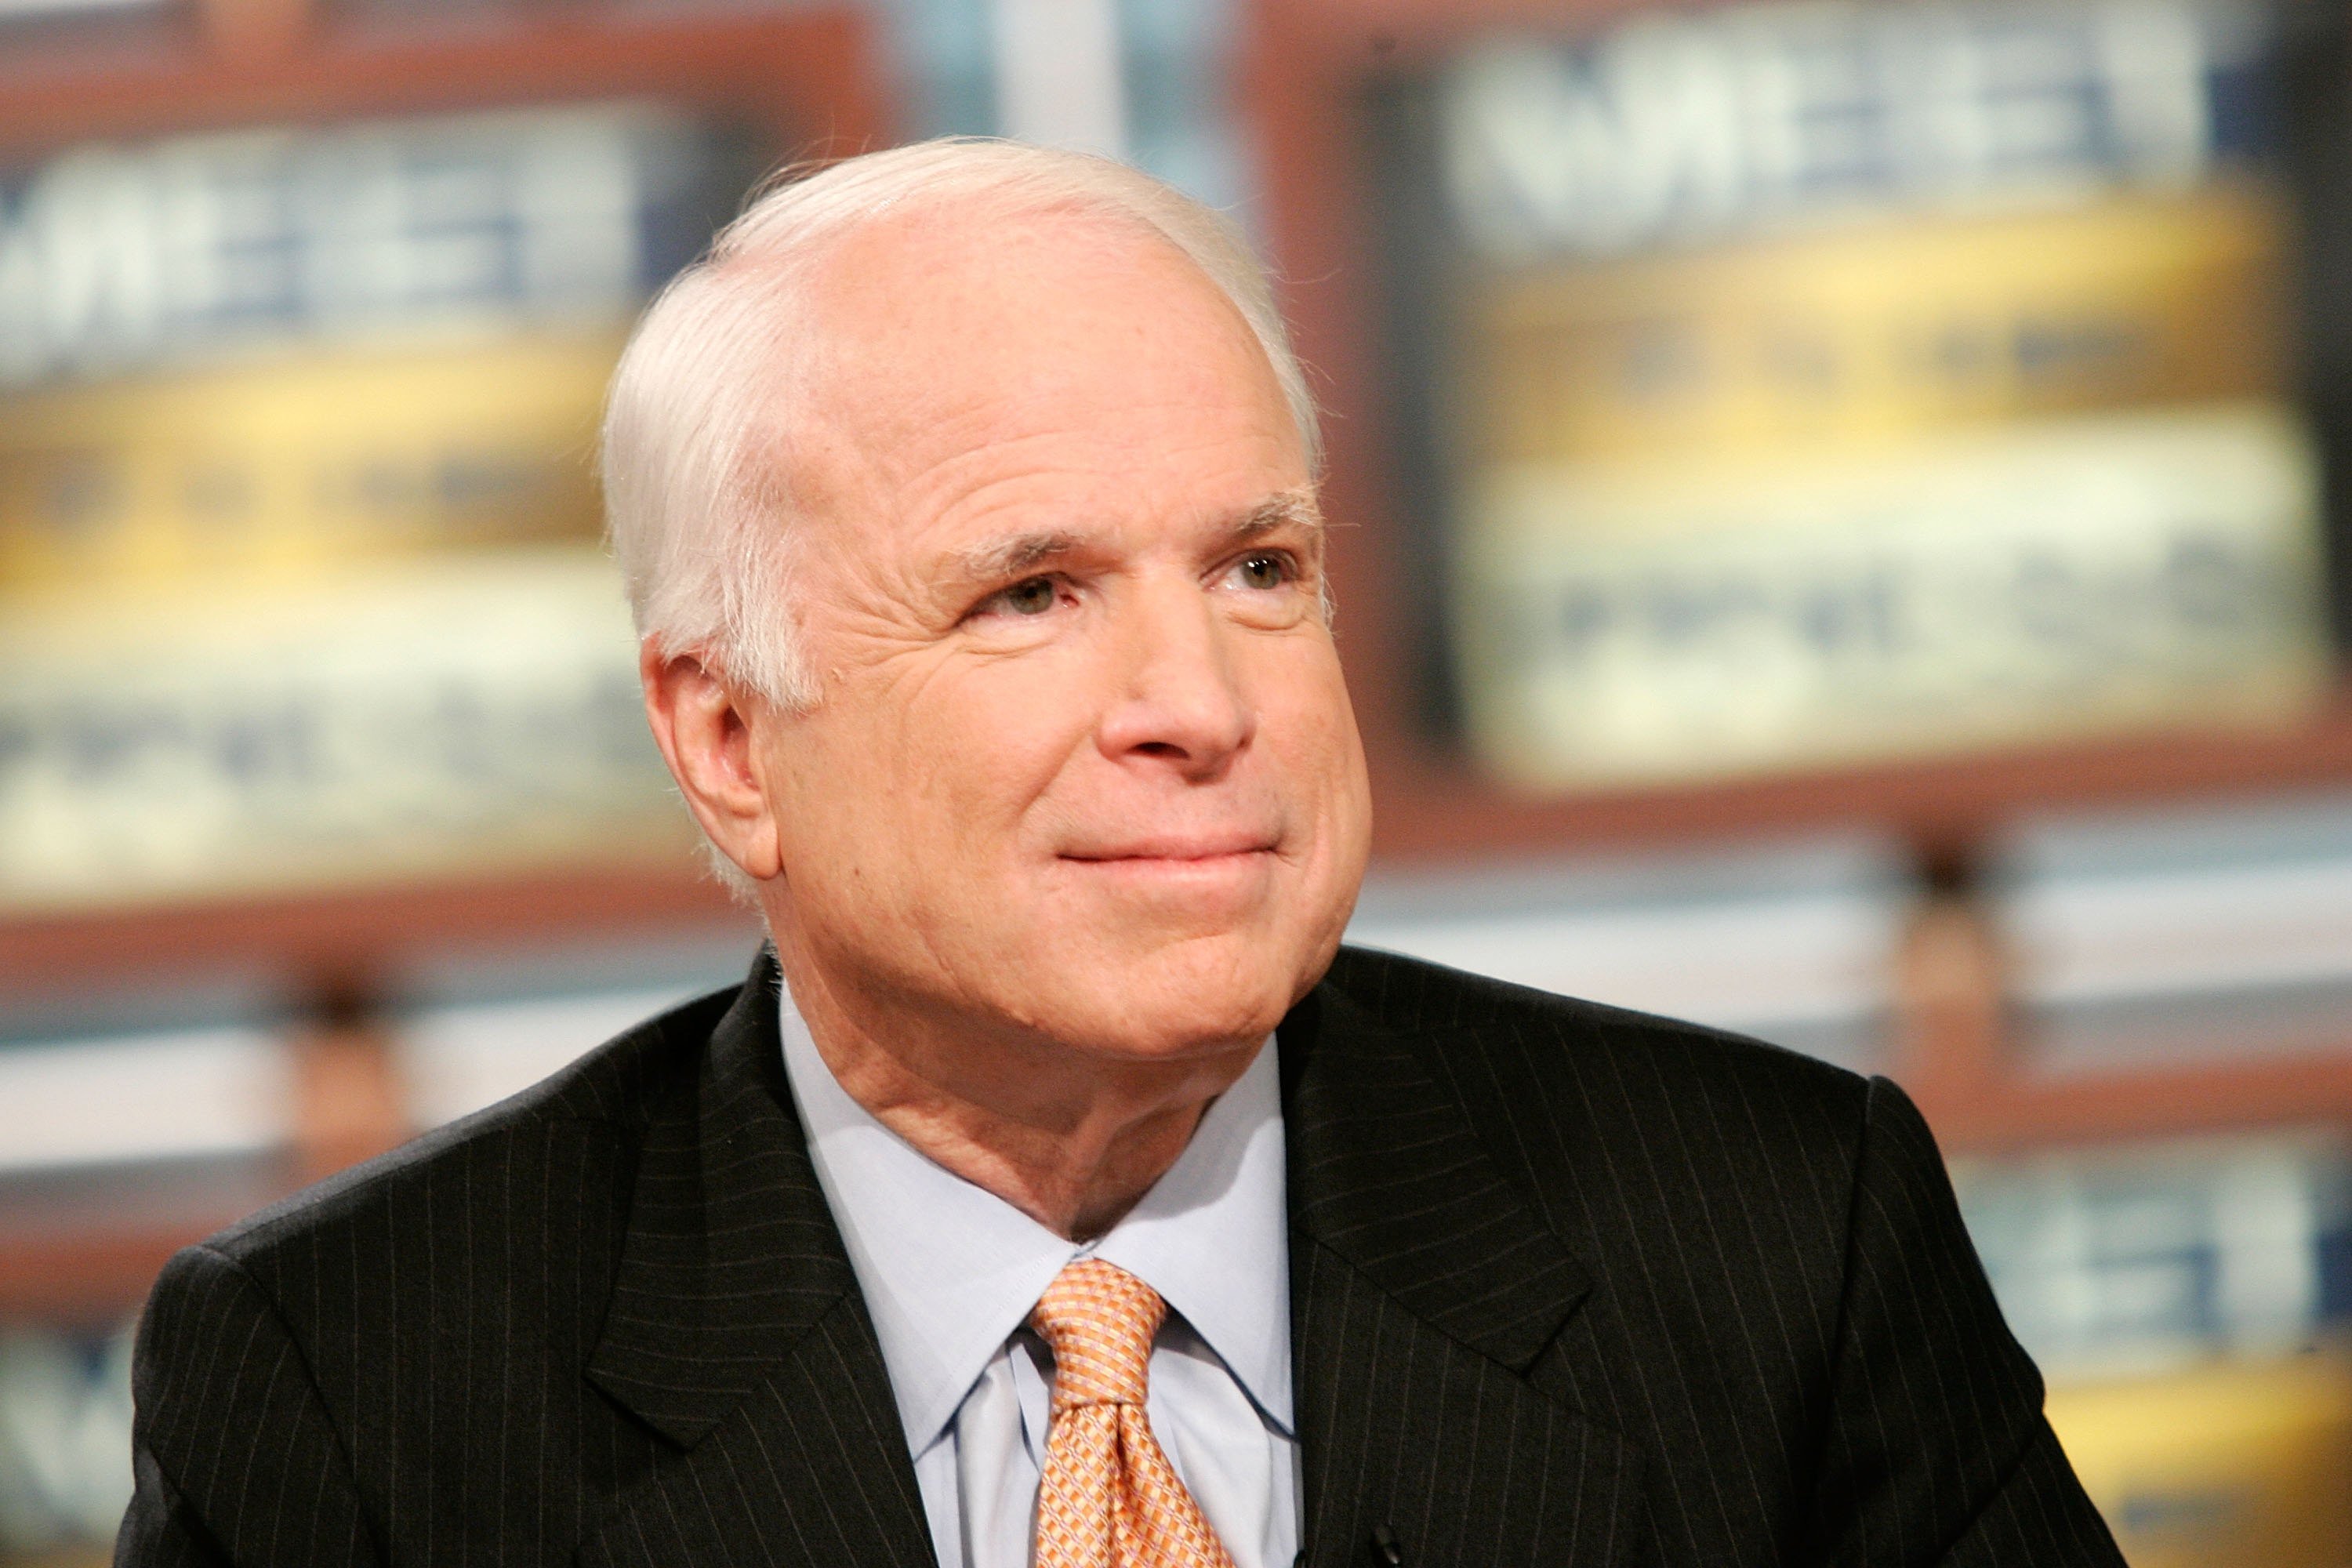 John McCain speaks on "Meet the Press" during a taping at the NBC studios November 12, 2006 | Photo: GettyImages